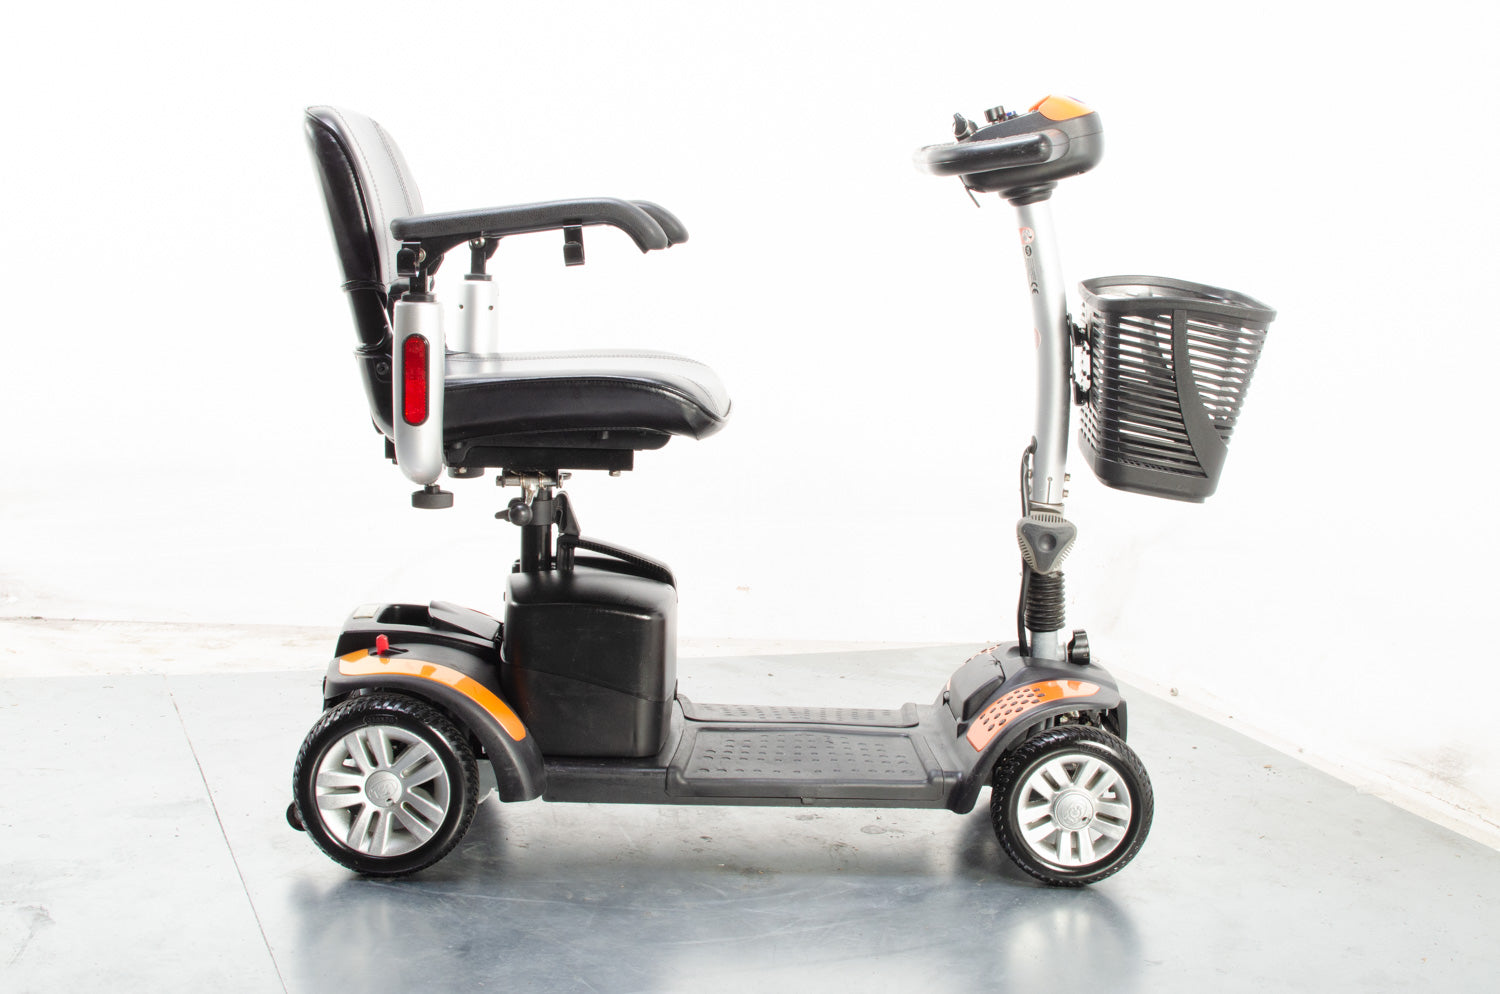 2015 TGA Eclipse 4mph Transportable Mobility Boot Scooter in Orange